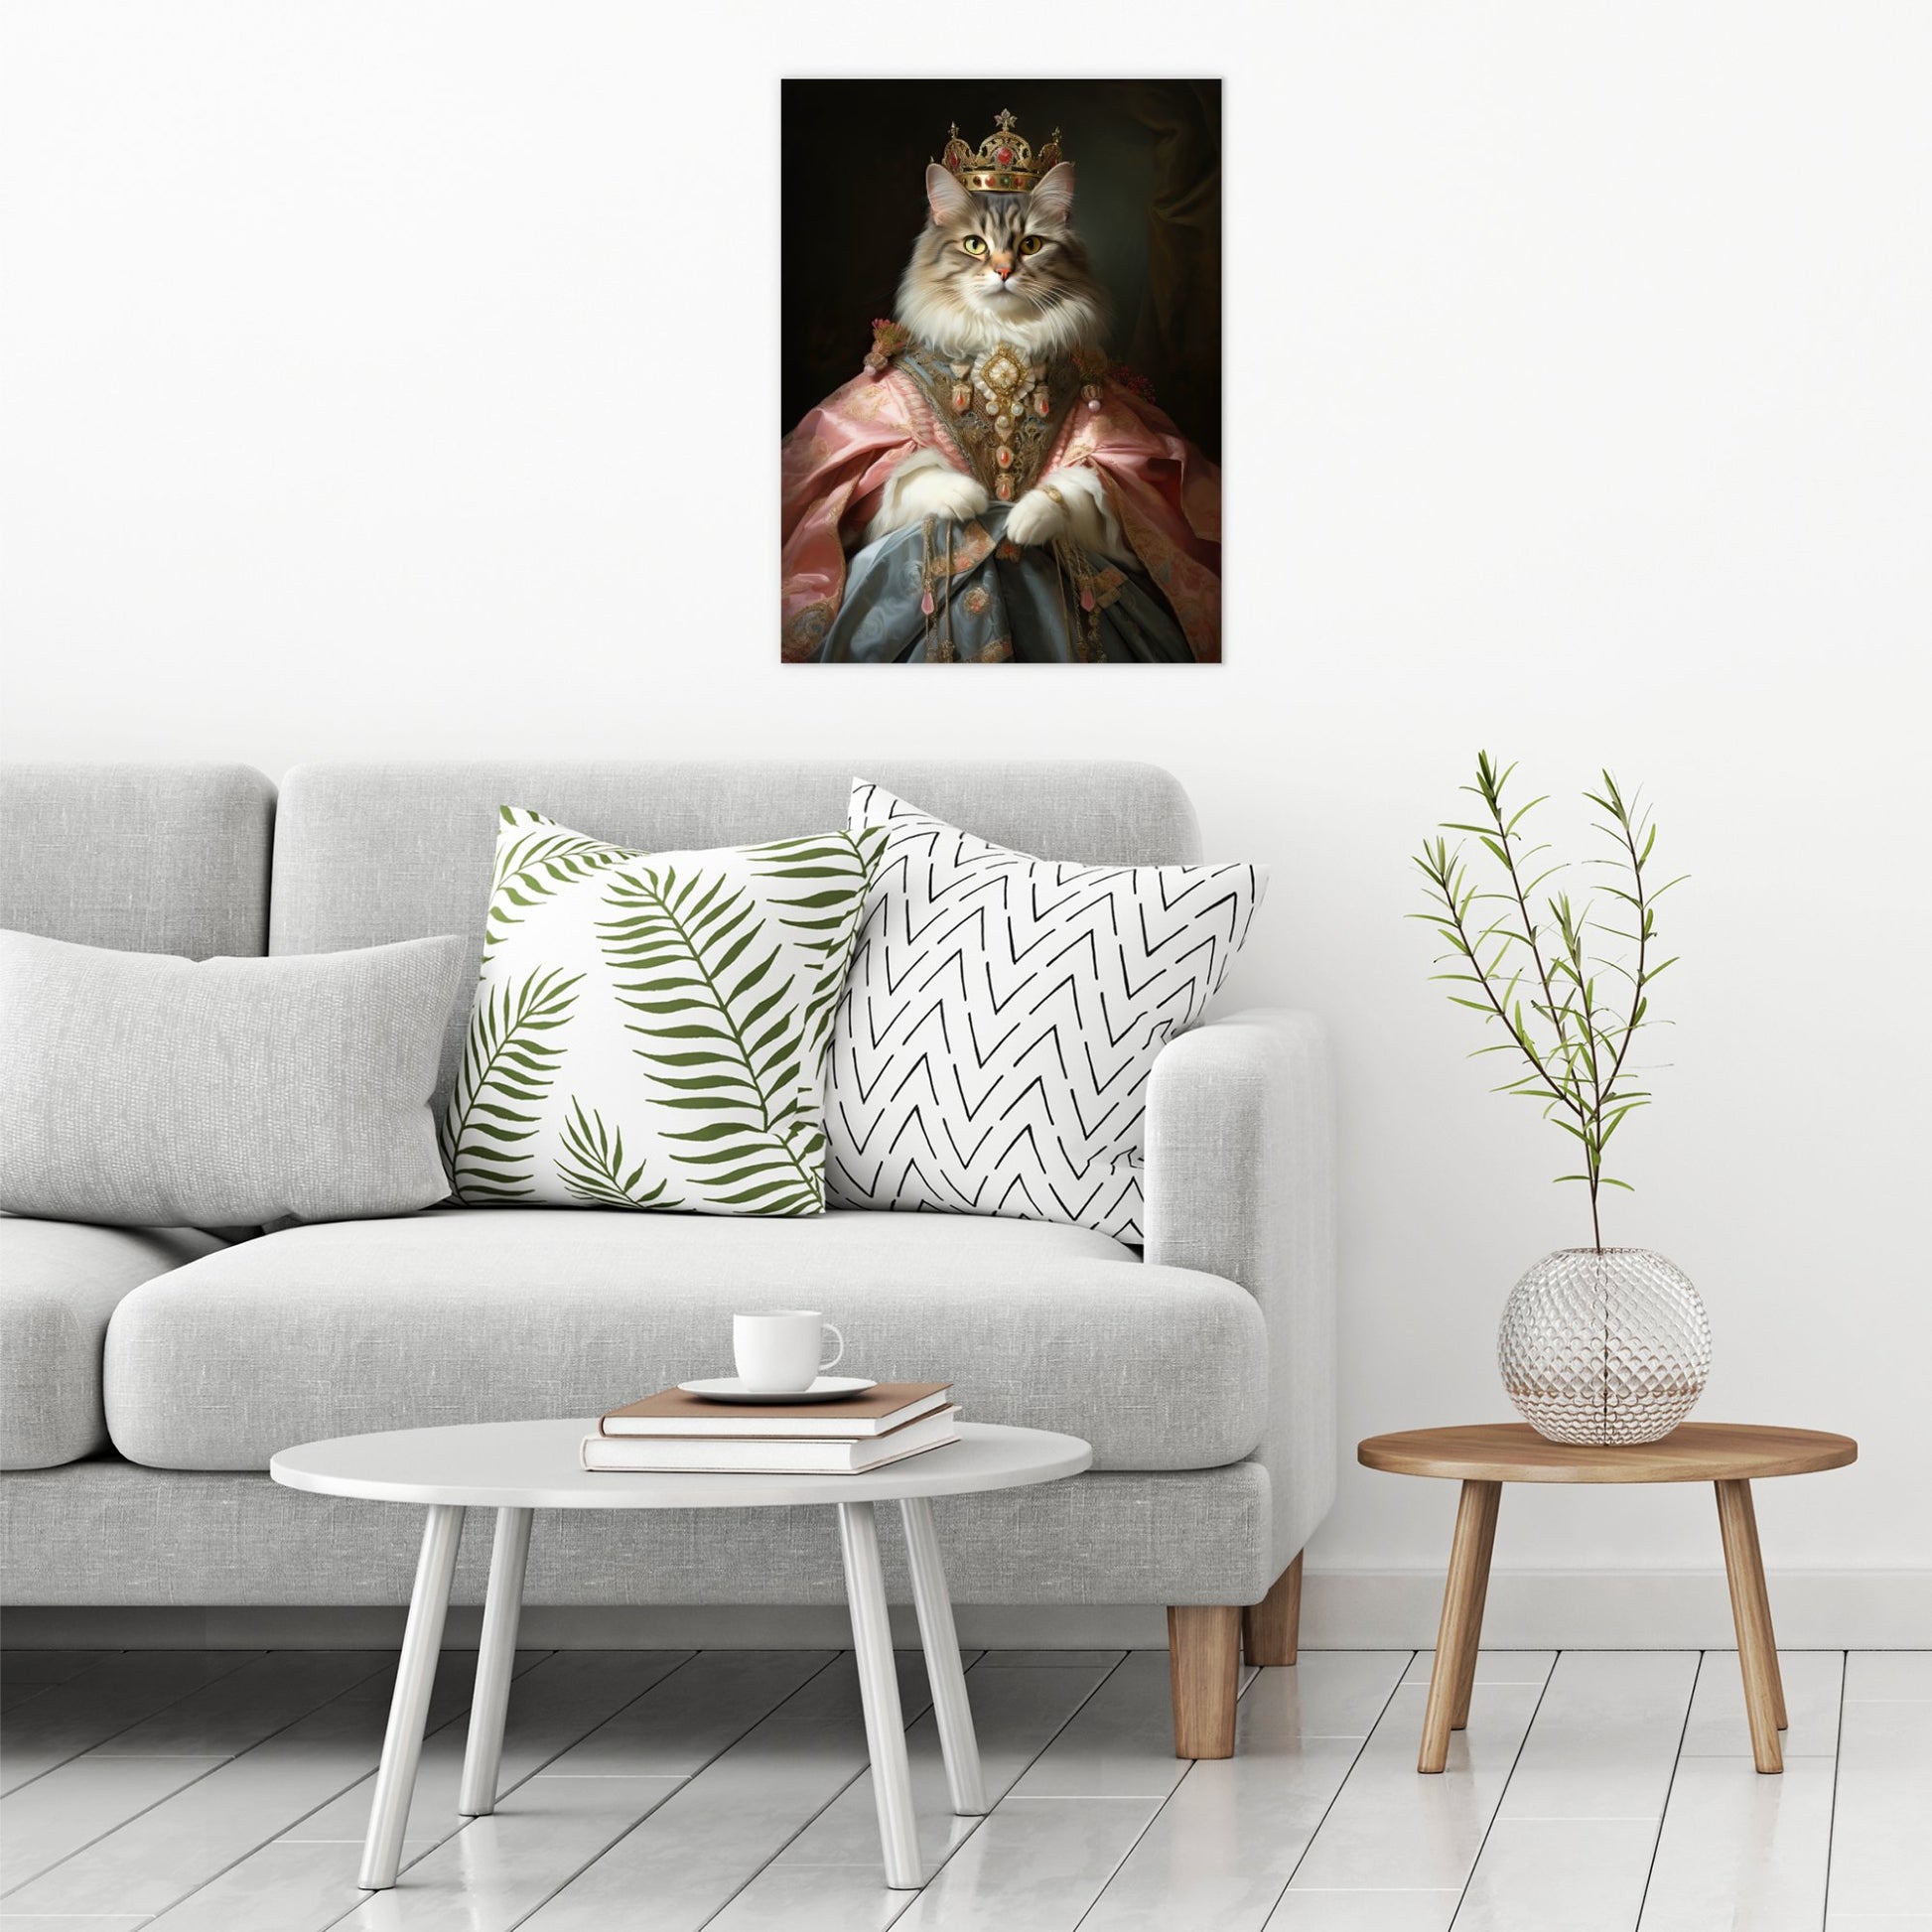 A contemporary modern room view showing a large size metal art poster display plate with printed design of a Pet Portraits - Princess Kitty Painting